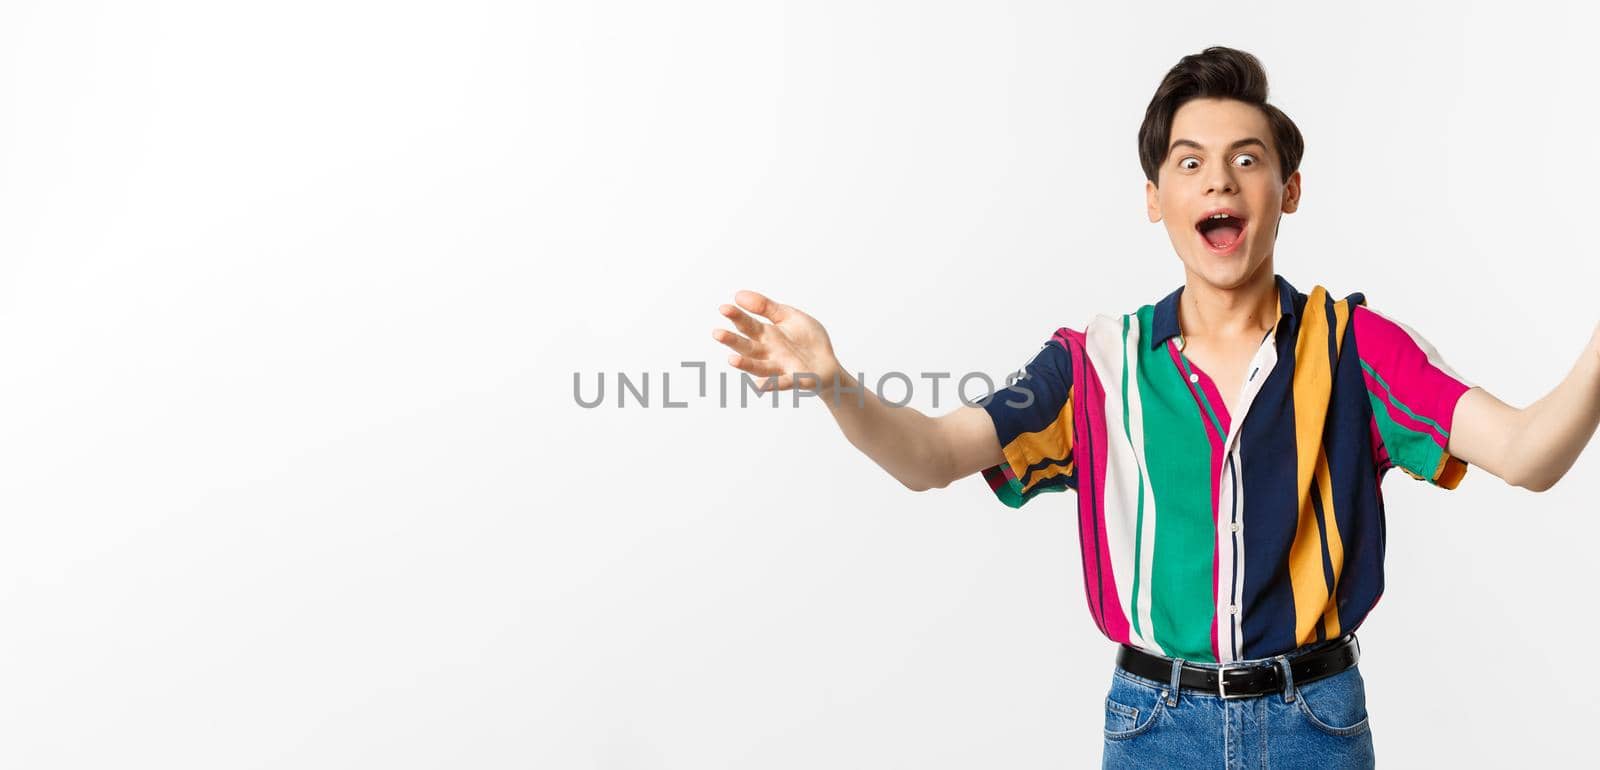 Amazed funny guy spread hands sideways and screaming of excitement, reaching for what he wants, standing over white background.